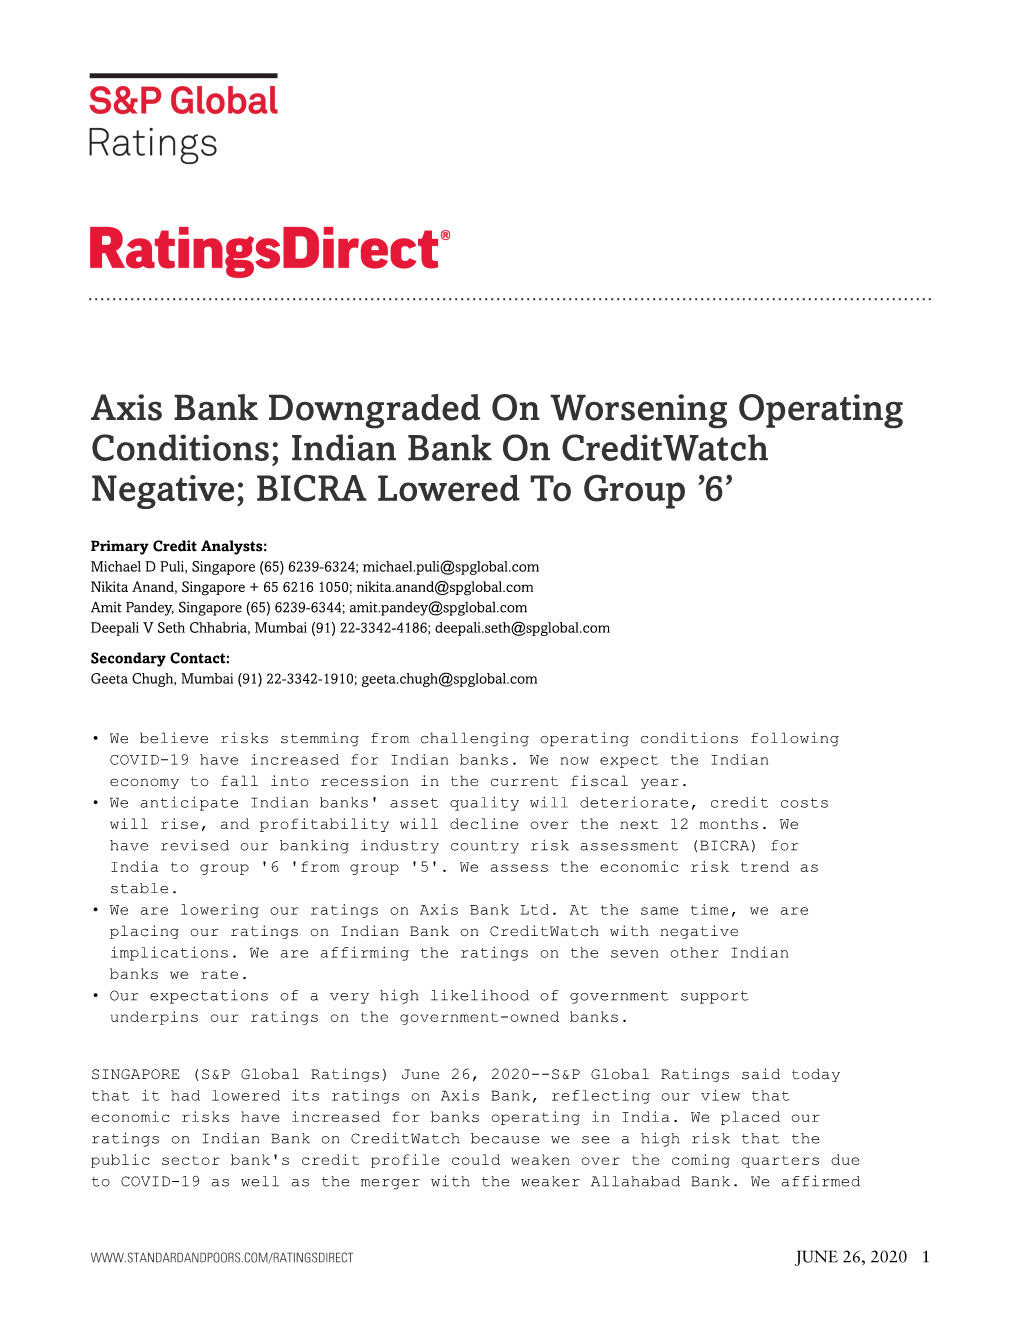 Axis Bank Downgraded on Worsening Operating Conditions; Indian Bank on Creditwatch Negative; BICRA Lowered to Group '6'